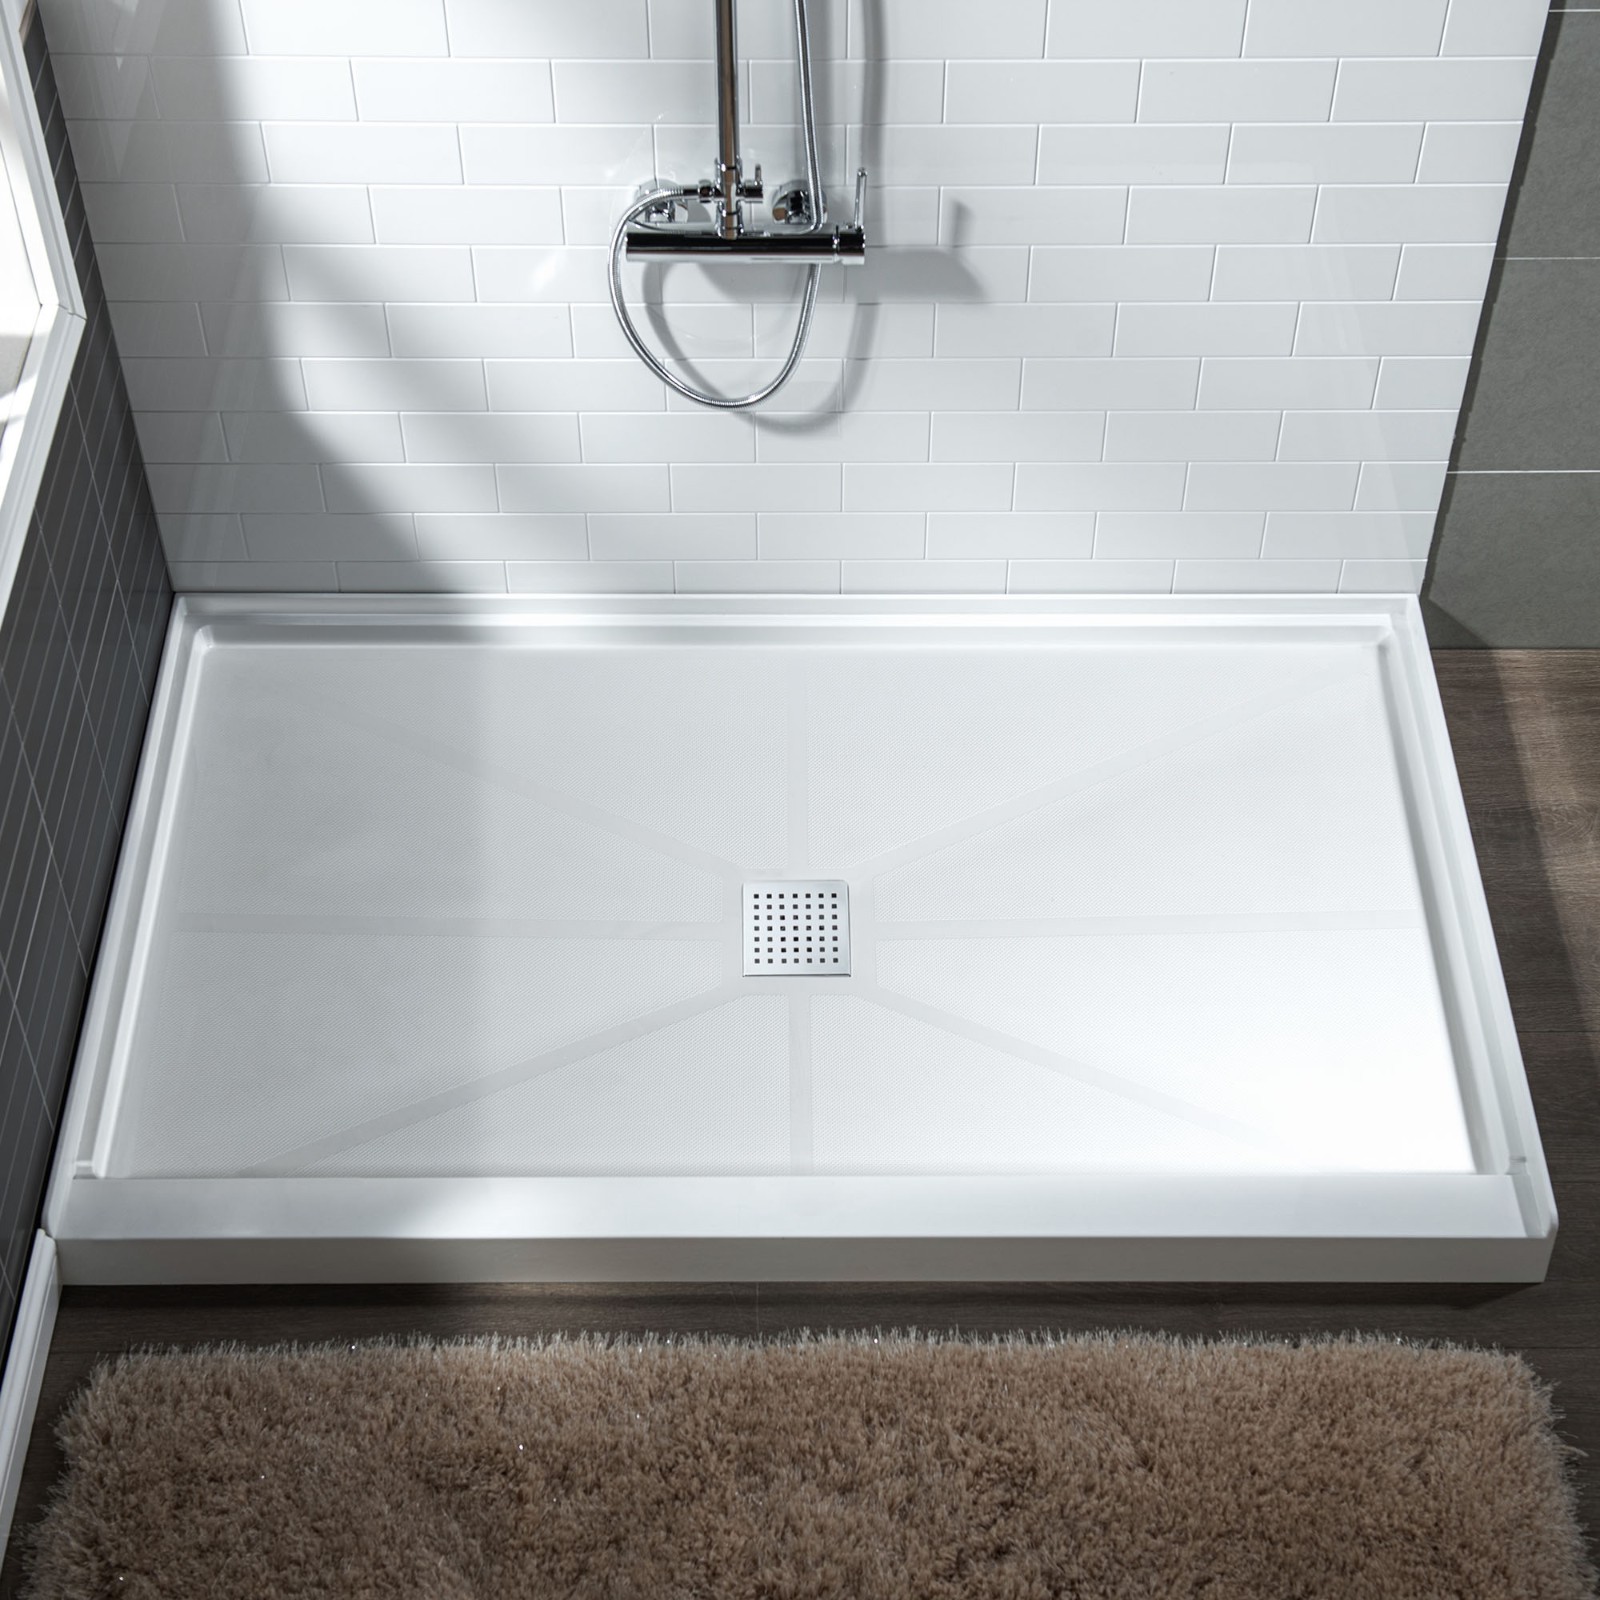  WOODBRIDGE SBR4836-1000C-CH SolidSurface Shower Base with Recessed Trench Side Including  Chrome Linear Cover, 48